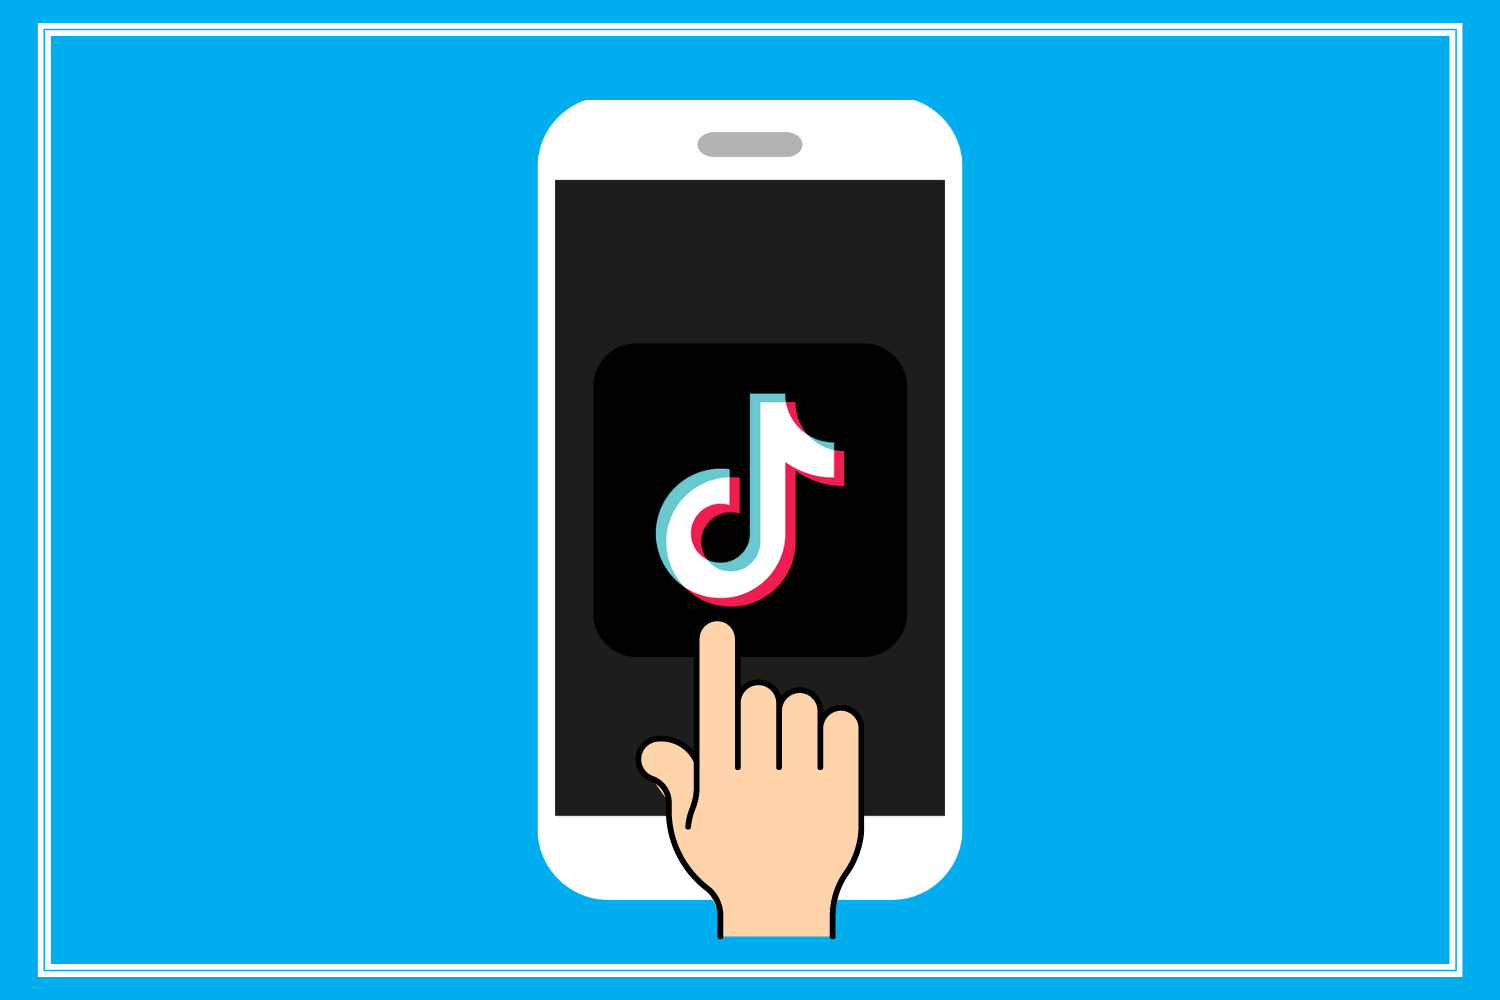 vector image of a hand clicking on the tiktok app on a mobile device.